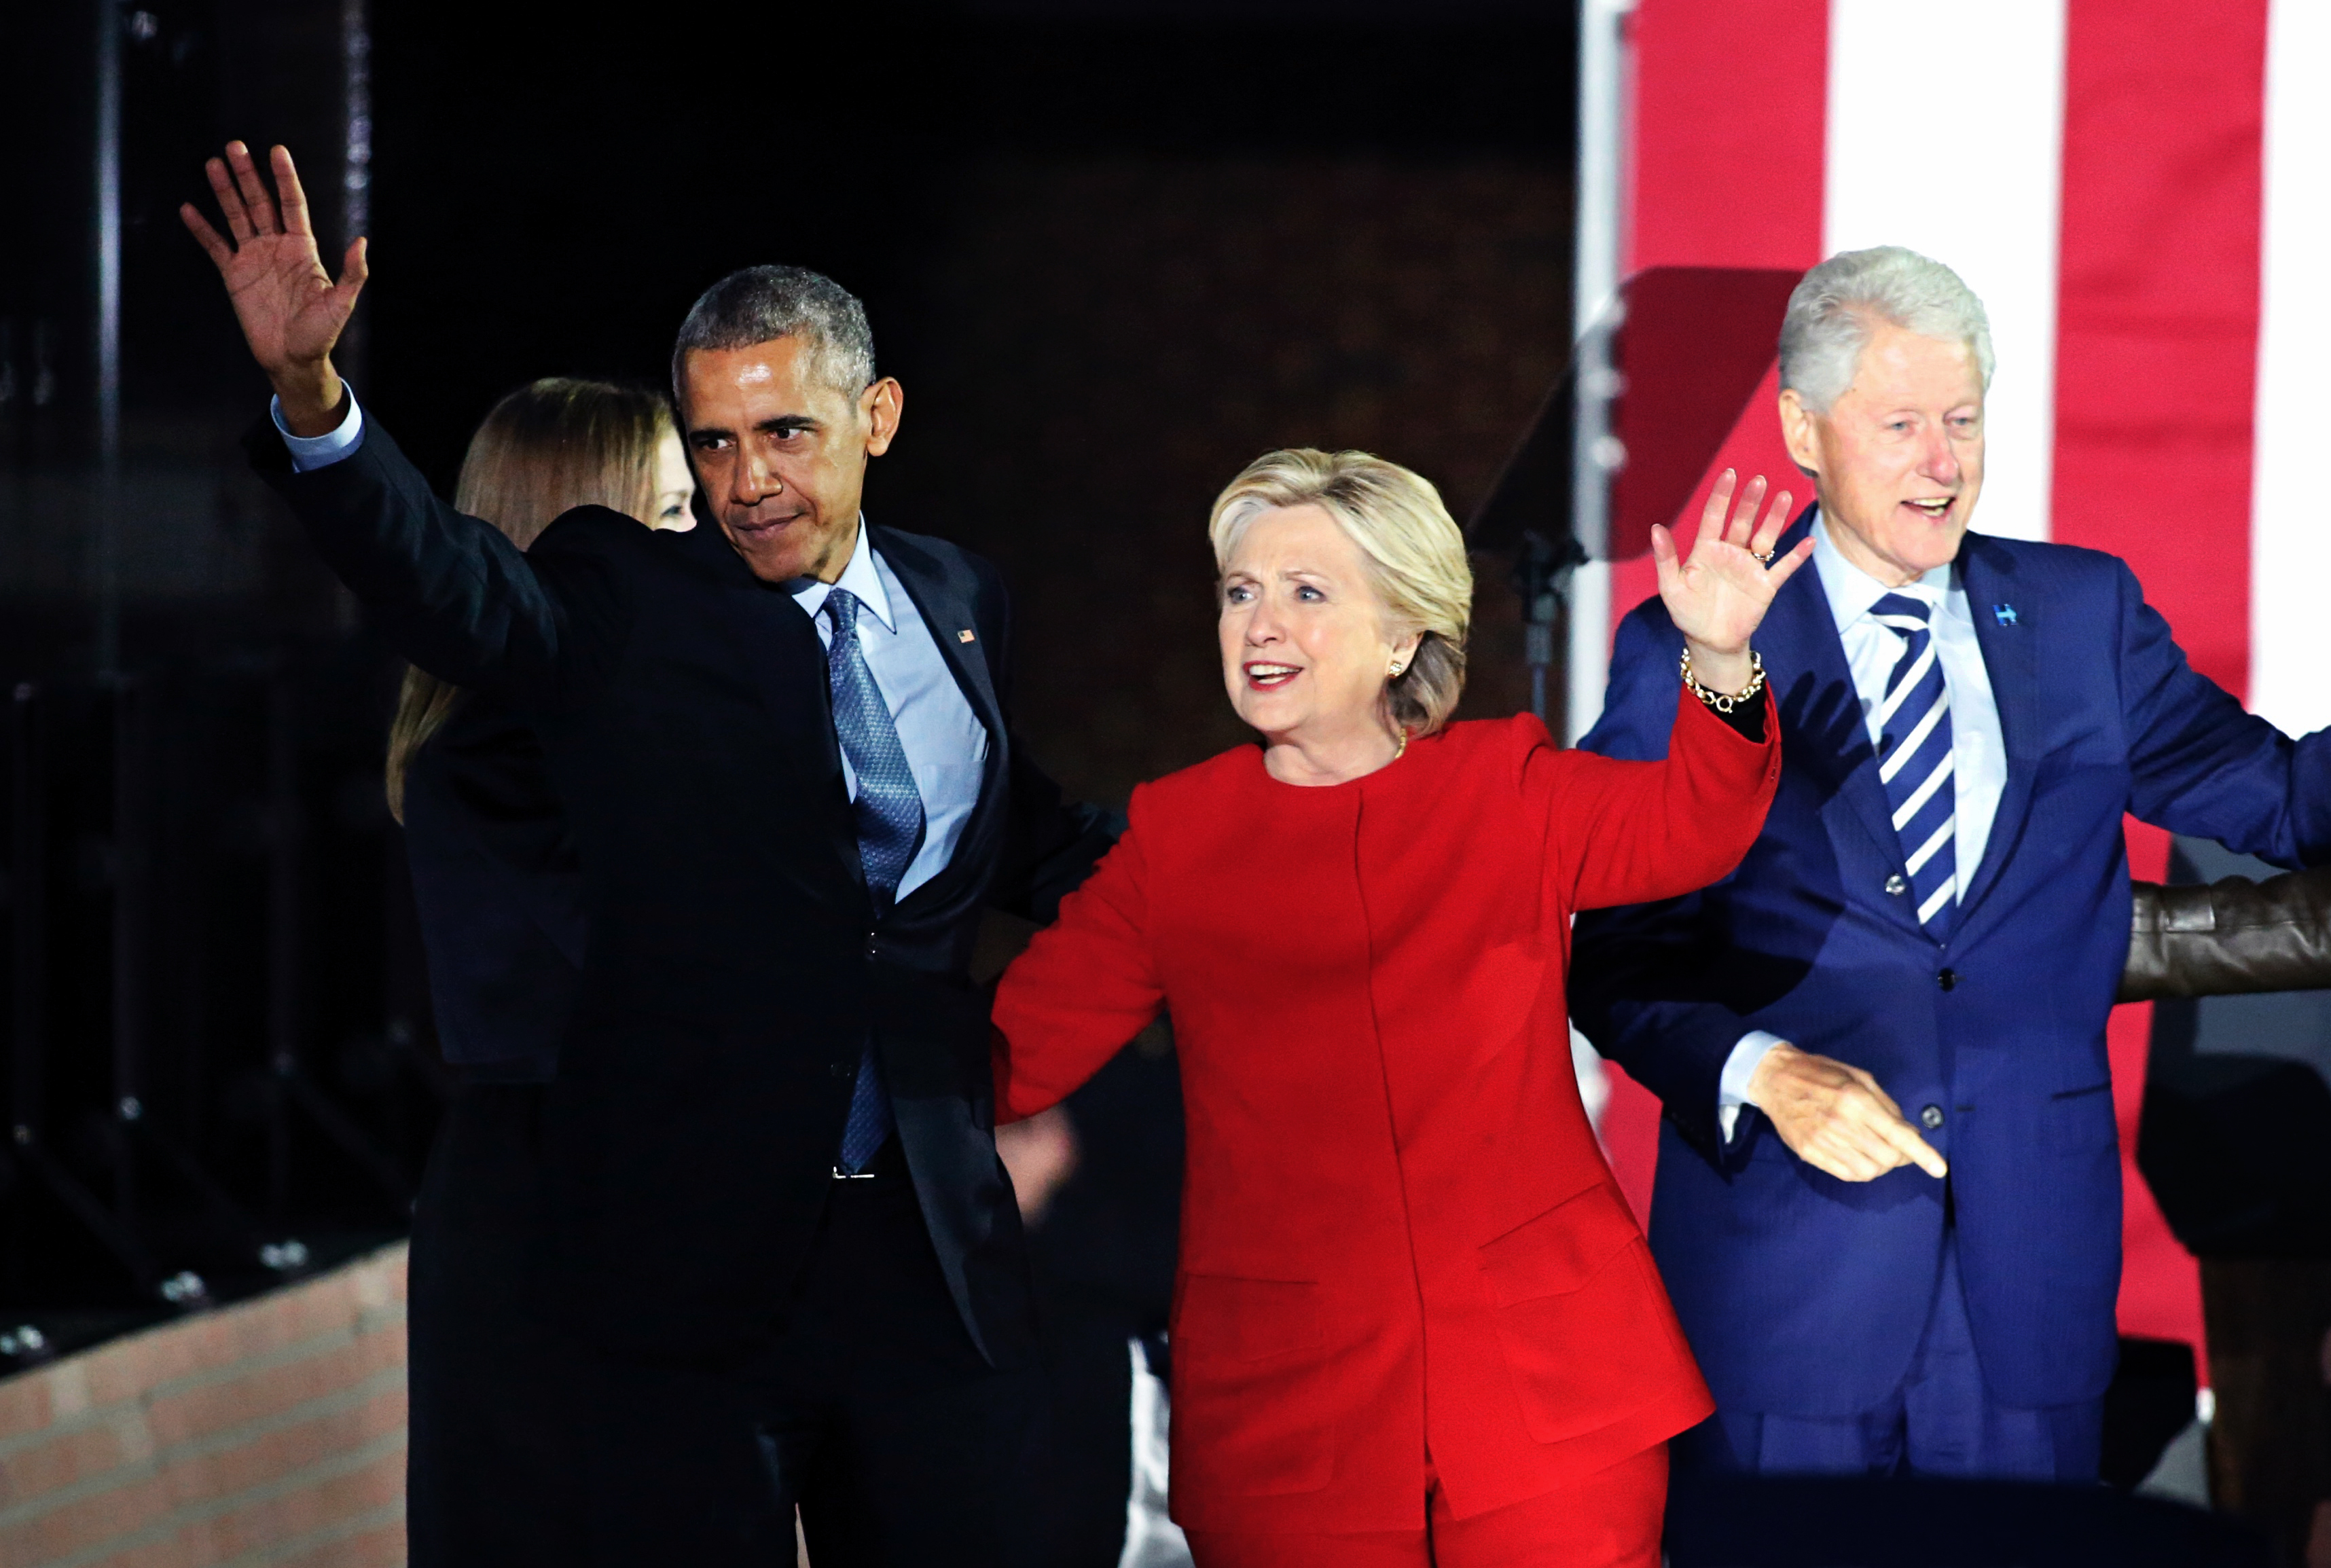 US Democratic presidential nominee Hillary Clinton (C), US President Barack Obama (L), and former US president Bill Clinton (R) wave to the crowd after a rally on Independence Mall in Philadelphia, Pennsylvania, November 07, 2016 About 40,000 people flooded Independence Mall in Philadelphia for Hillary Clinton's rally with her husband Bill, President Barack Obama and his wife Michelle at her side, a campaign aide said. The attendance set a new record for Clinton, with the previous high point a rally in Ohio that drew 18,500 people, a campaign aide told reporters traveling with the candidate.  / AFP PHOTO / KENA BETANCUR